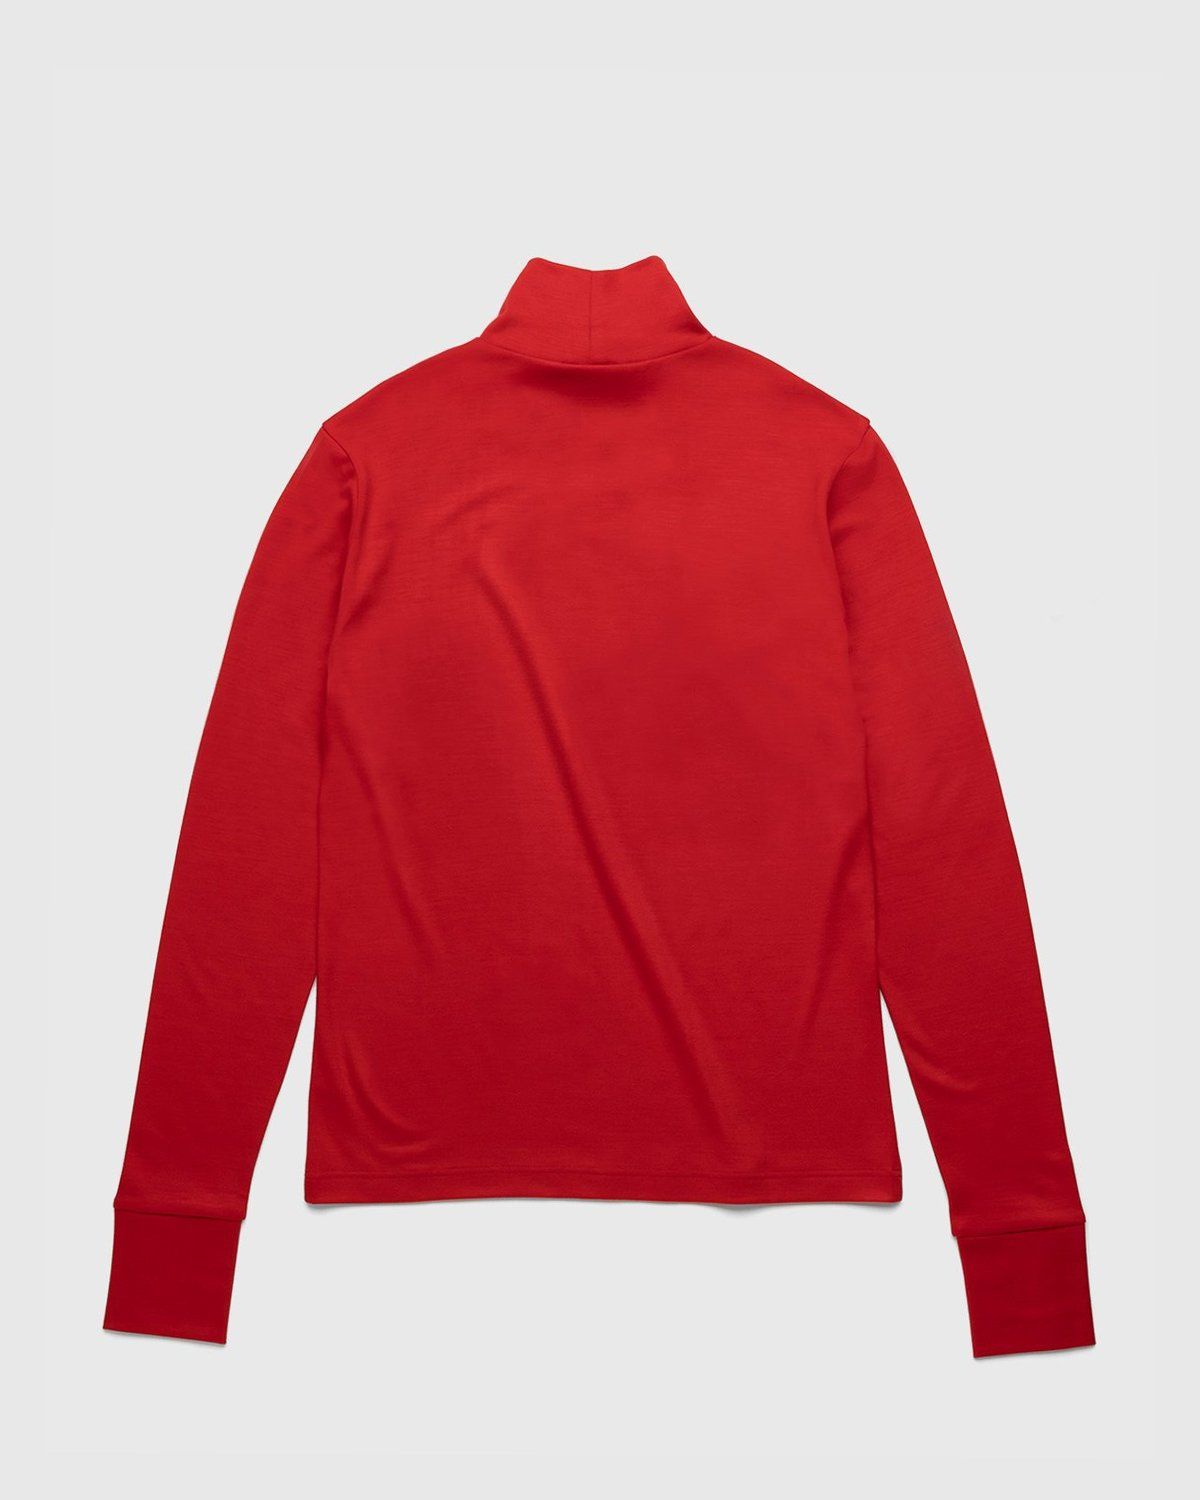 Phipps – Turtleneck Flame - Knitwear - Red - Image 2